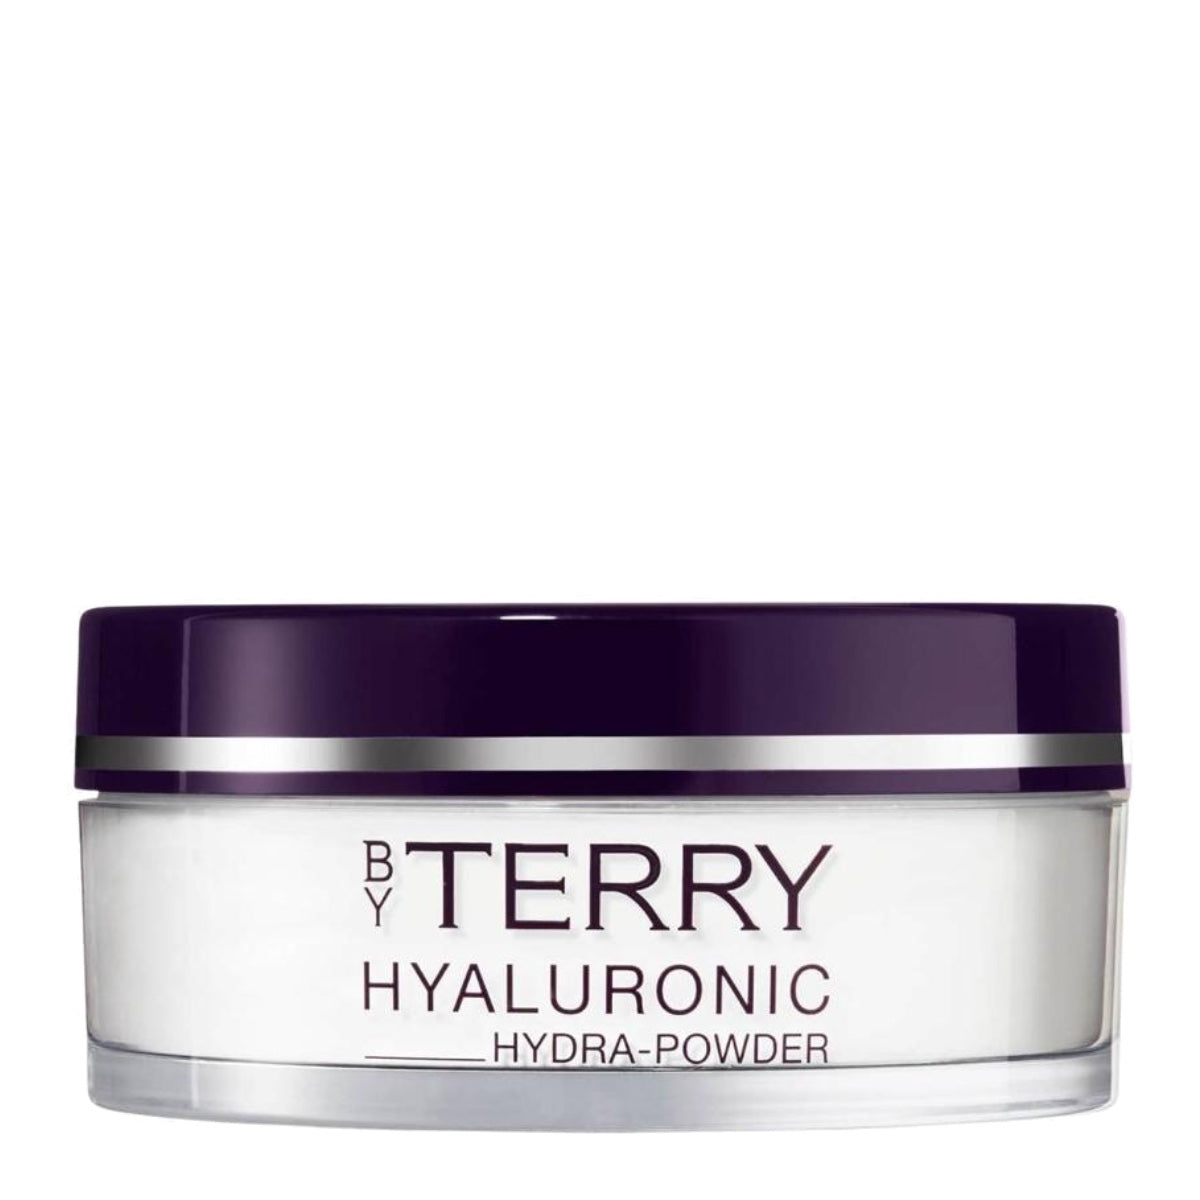 By Terry Hyaluronic Hydra-Powder Colorless